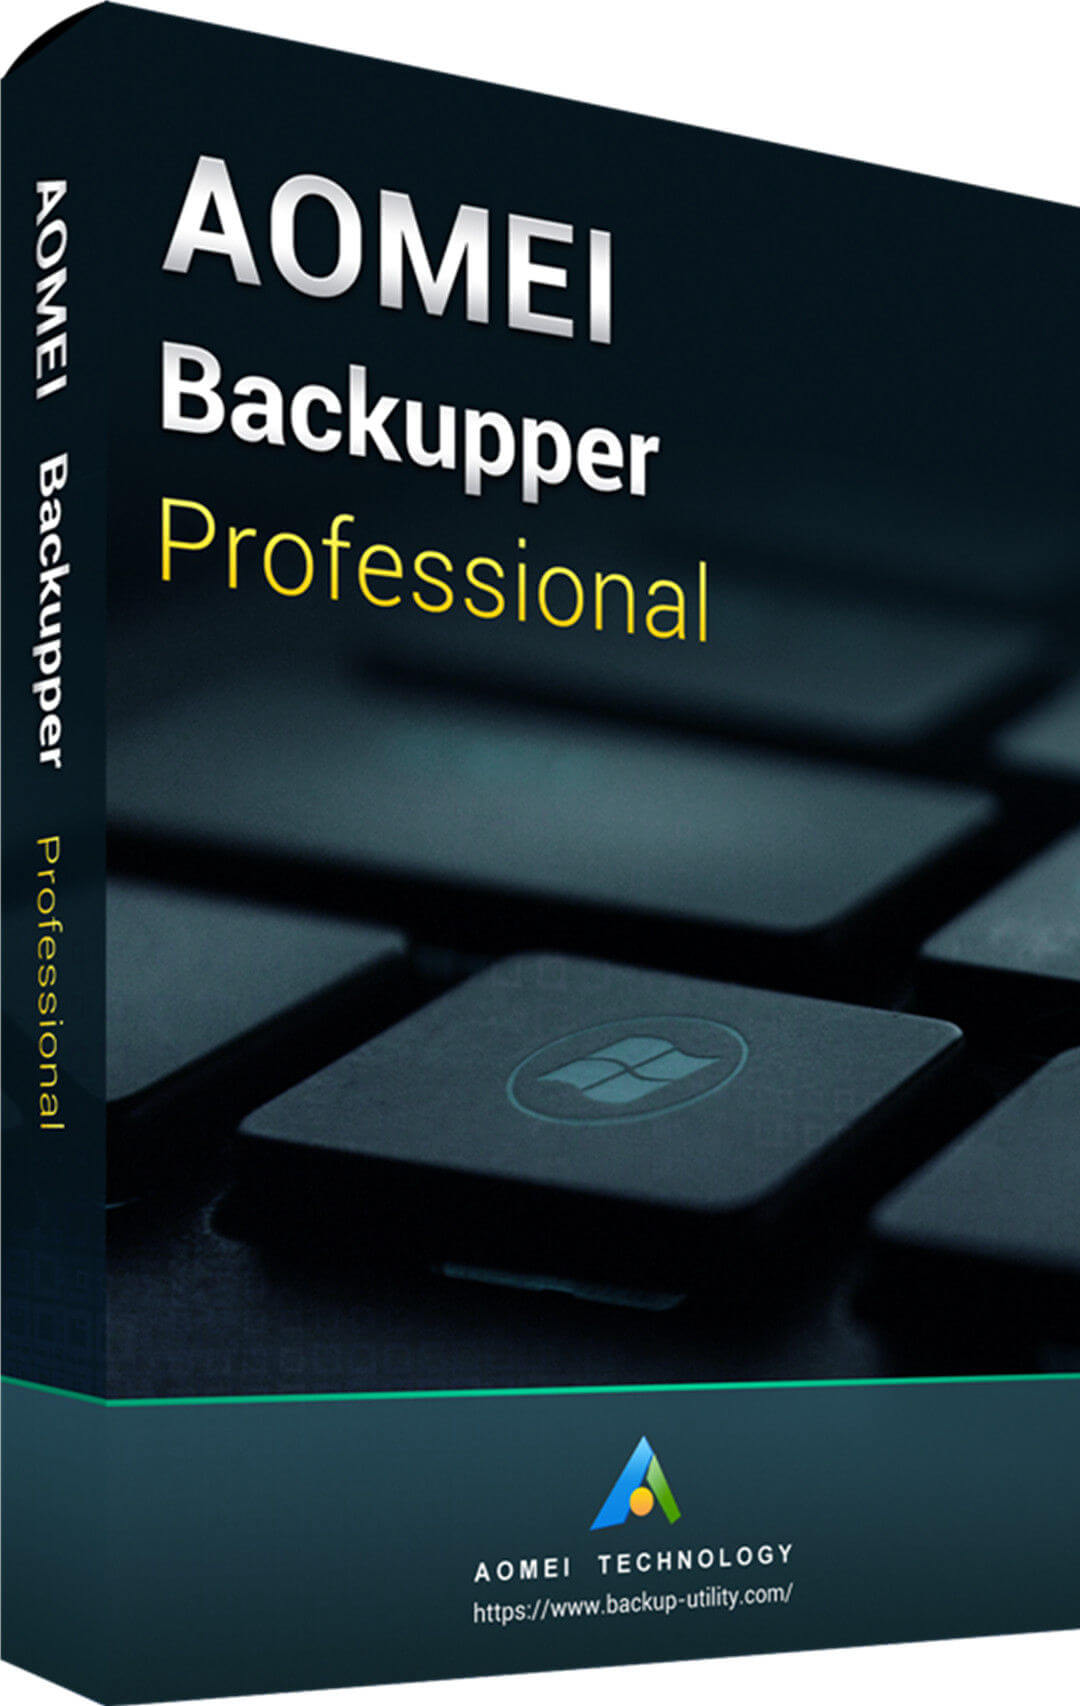 download the last version for apple AOMEI Backupper Professional 7.3.0